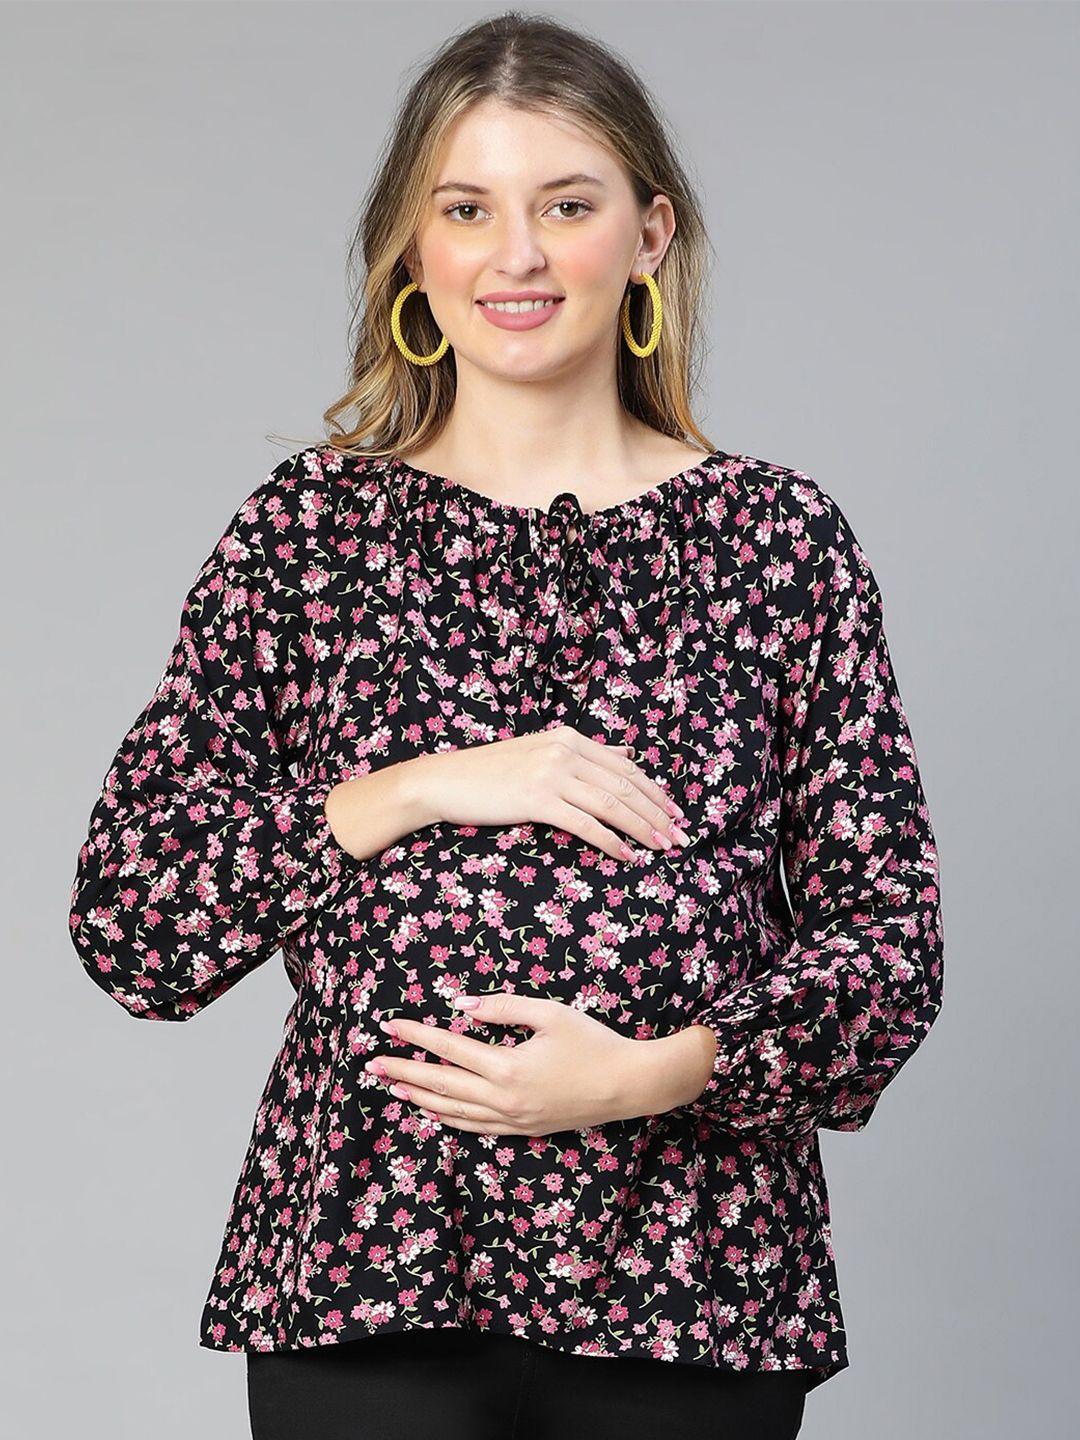 oxolloxo floral print crepe maternity top